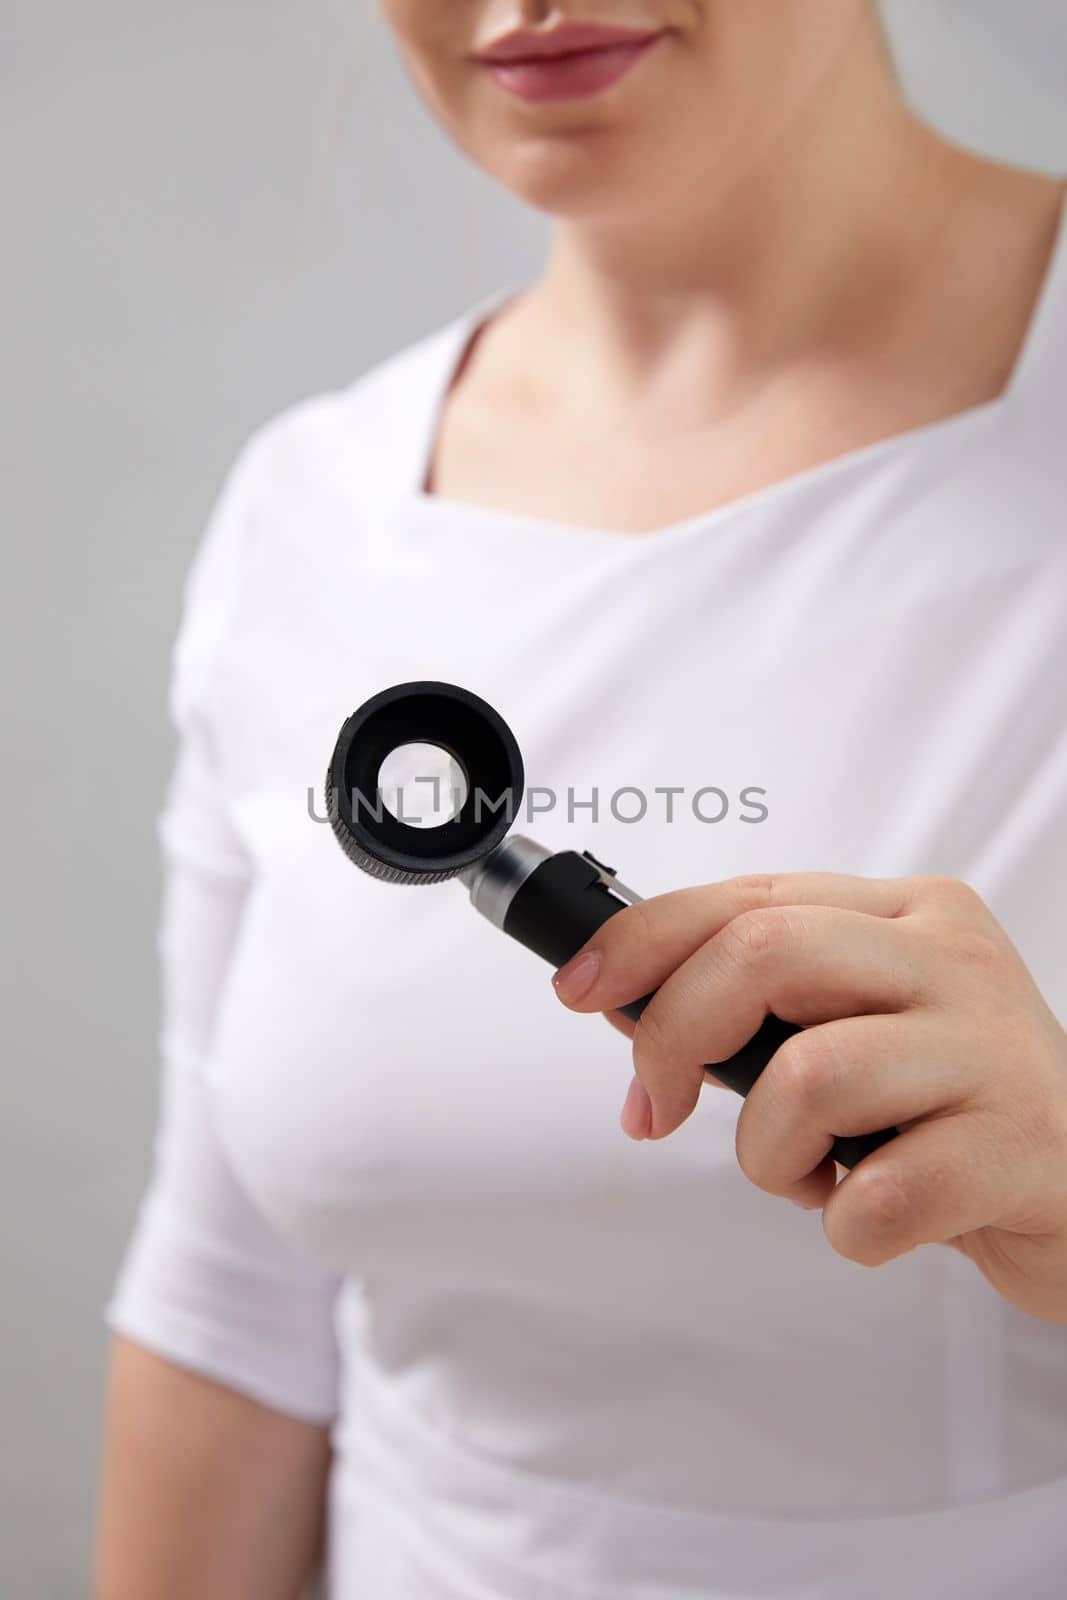 Woman gets professional skin exam at doctor's office. Dermatologist or cosmetology specialist uses magnifying glass to investigate mole, sun damage or potential cancerous tumor on young female face by Mariakray